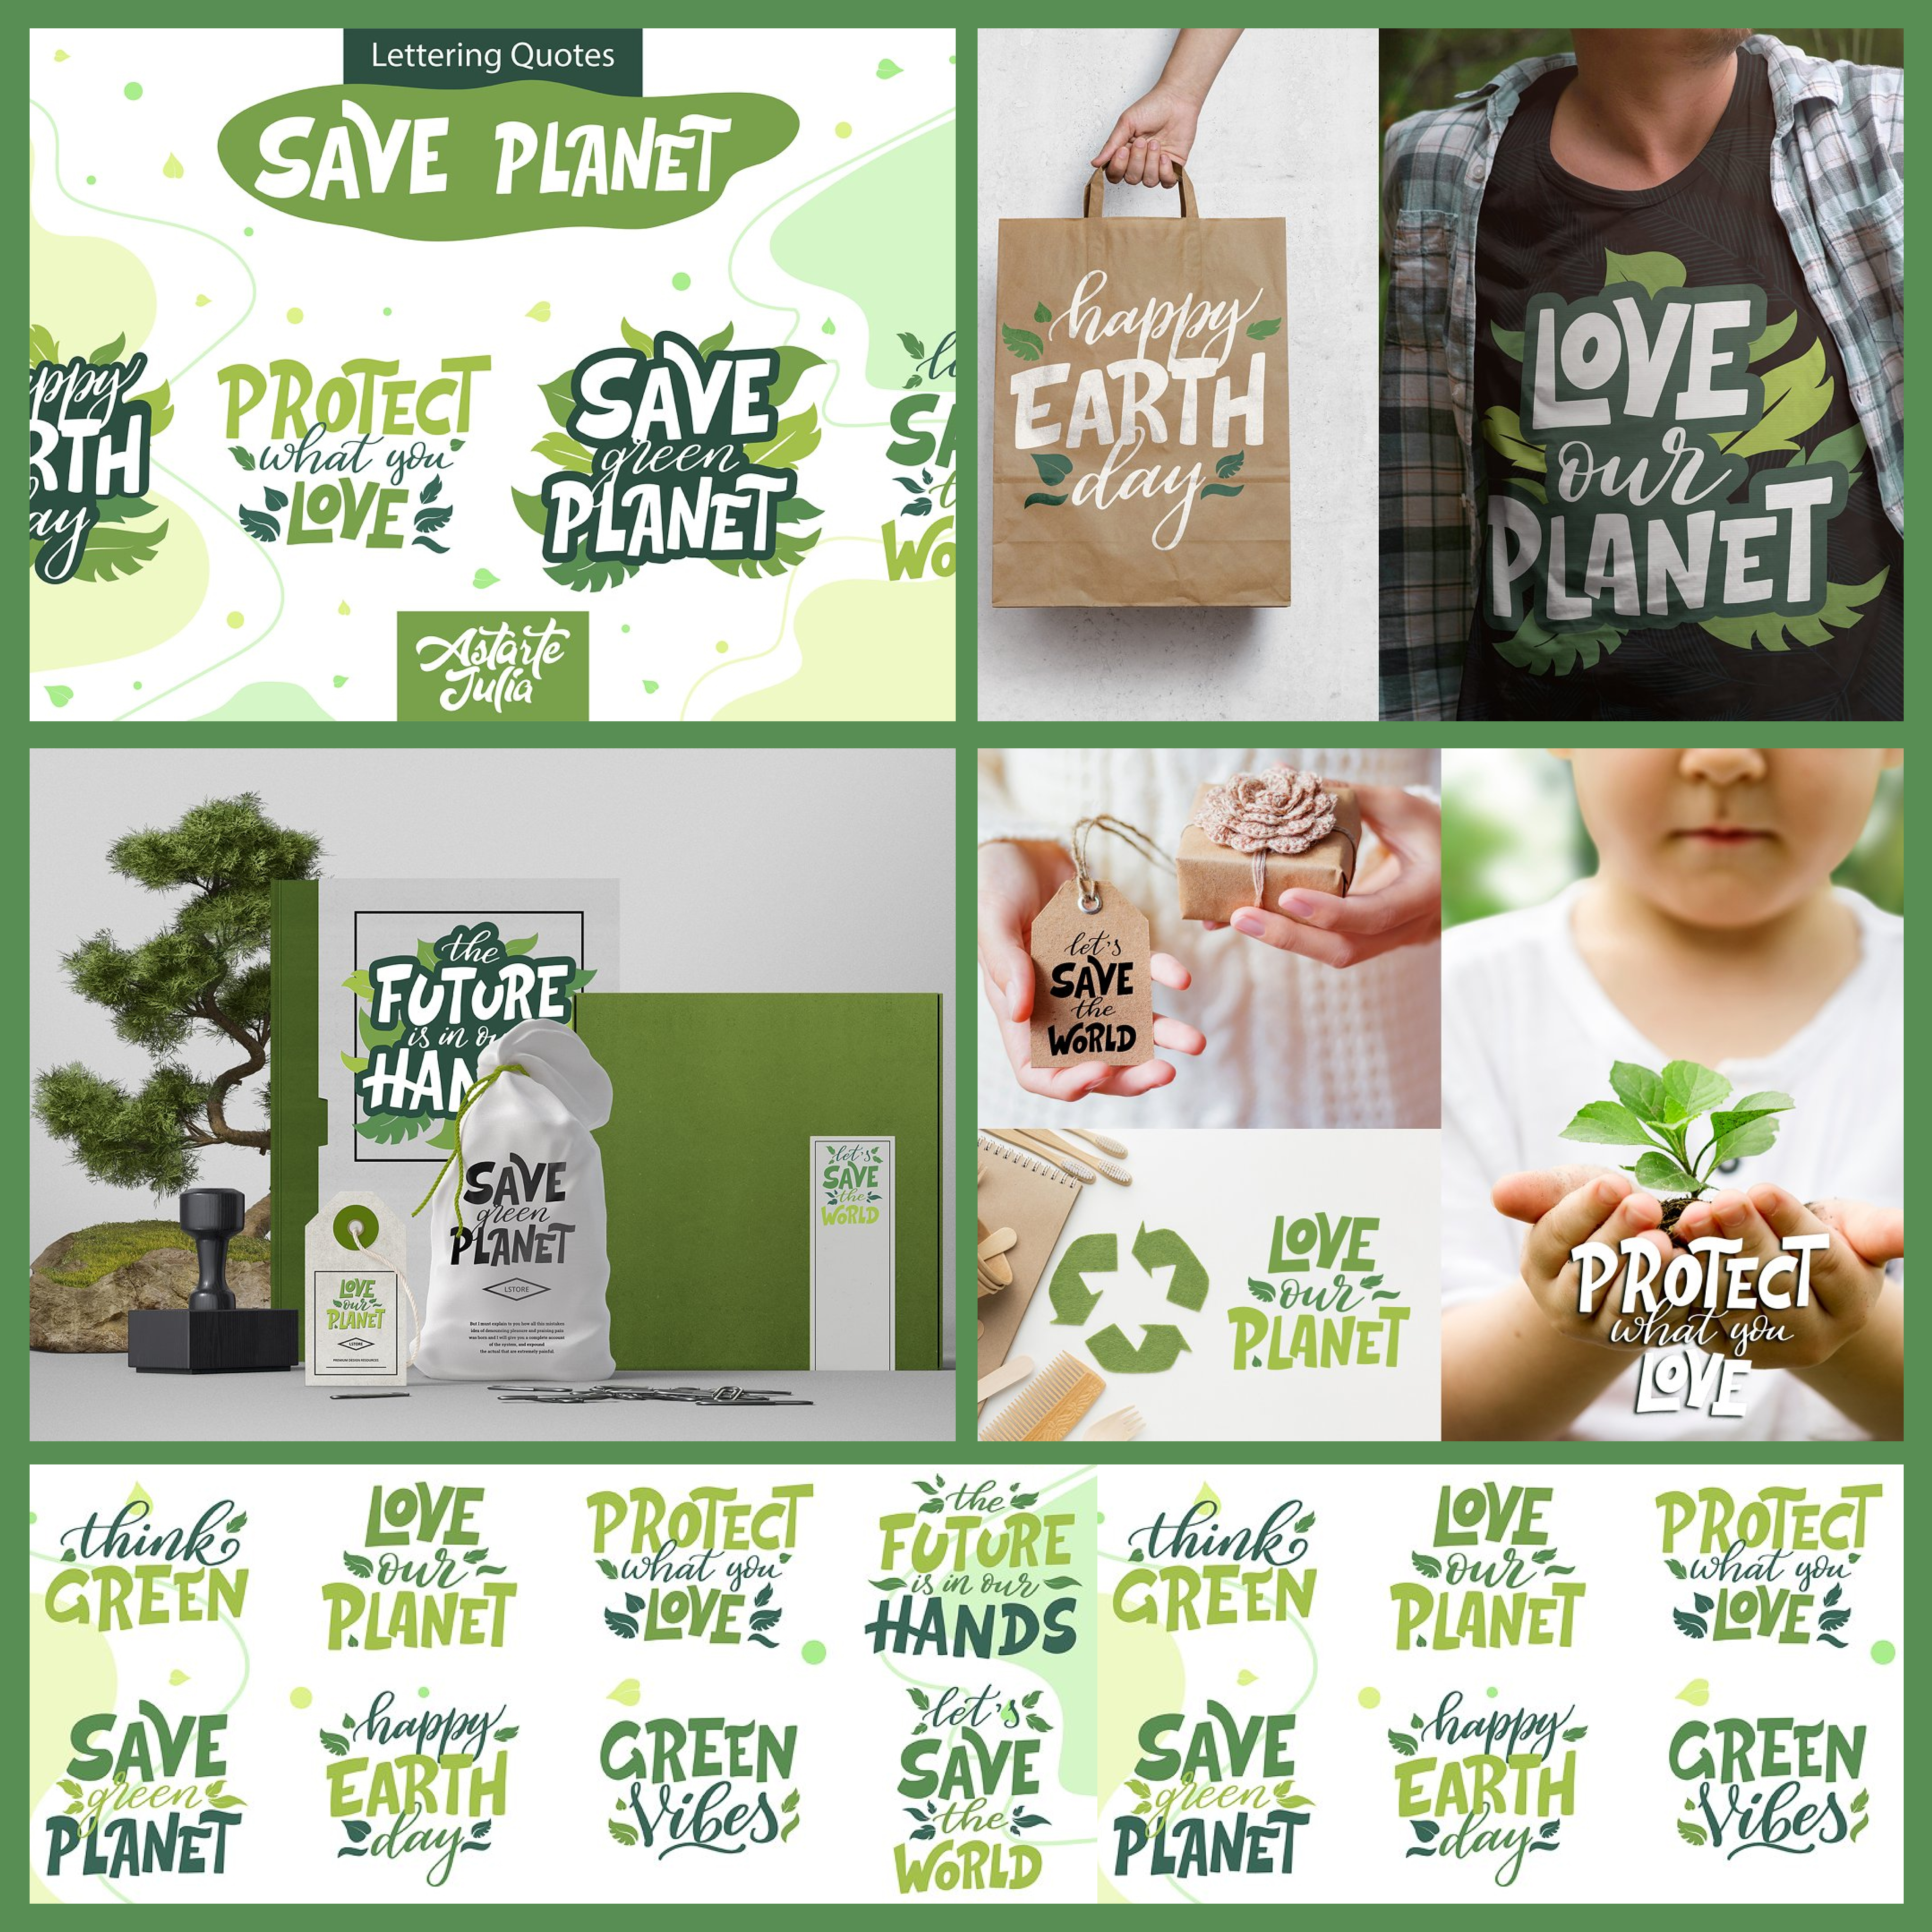 Images with save planet lettering quotes.